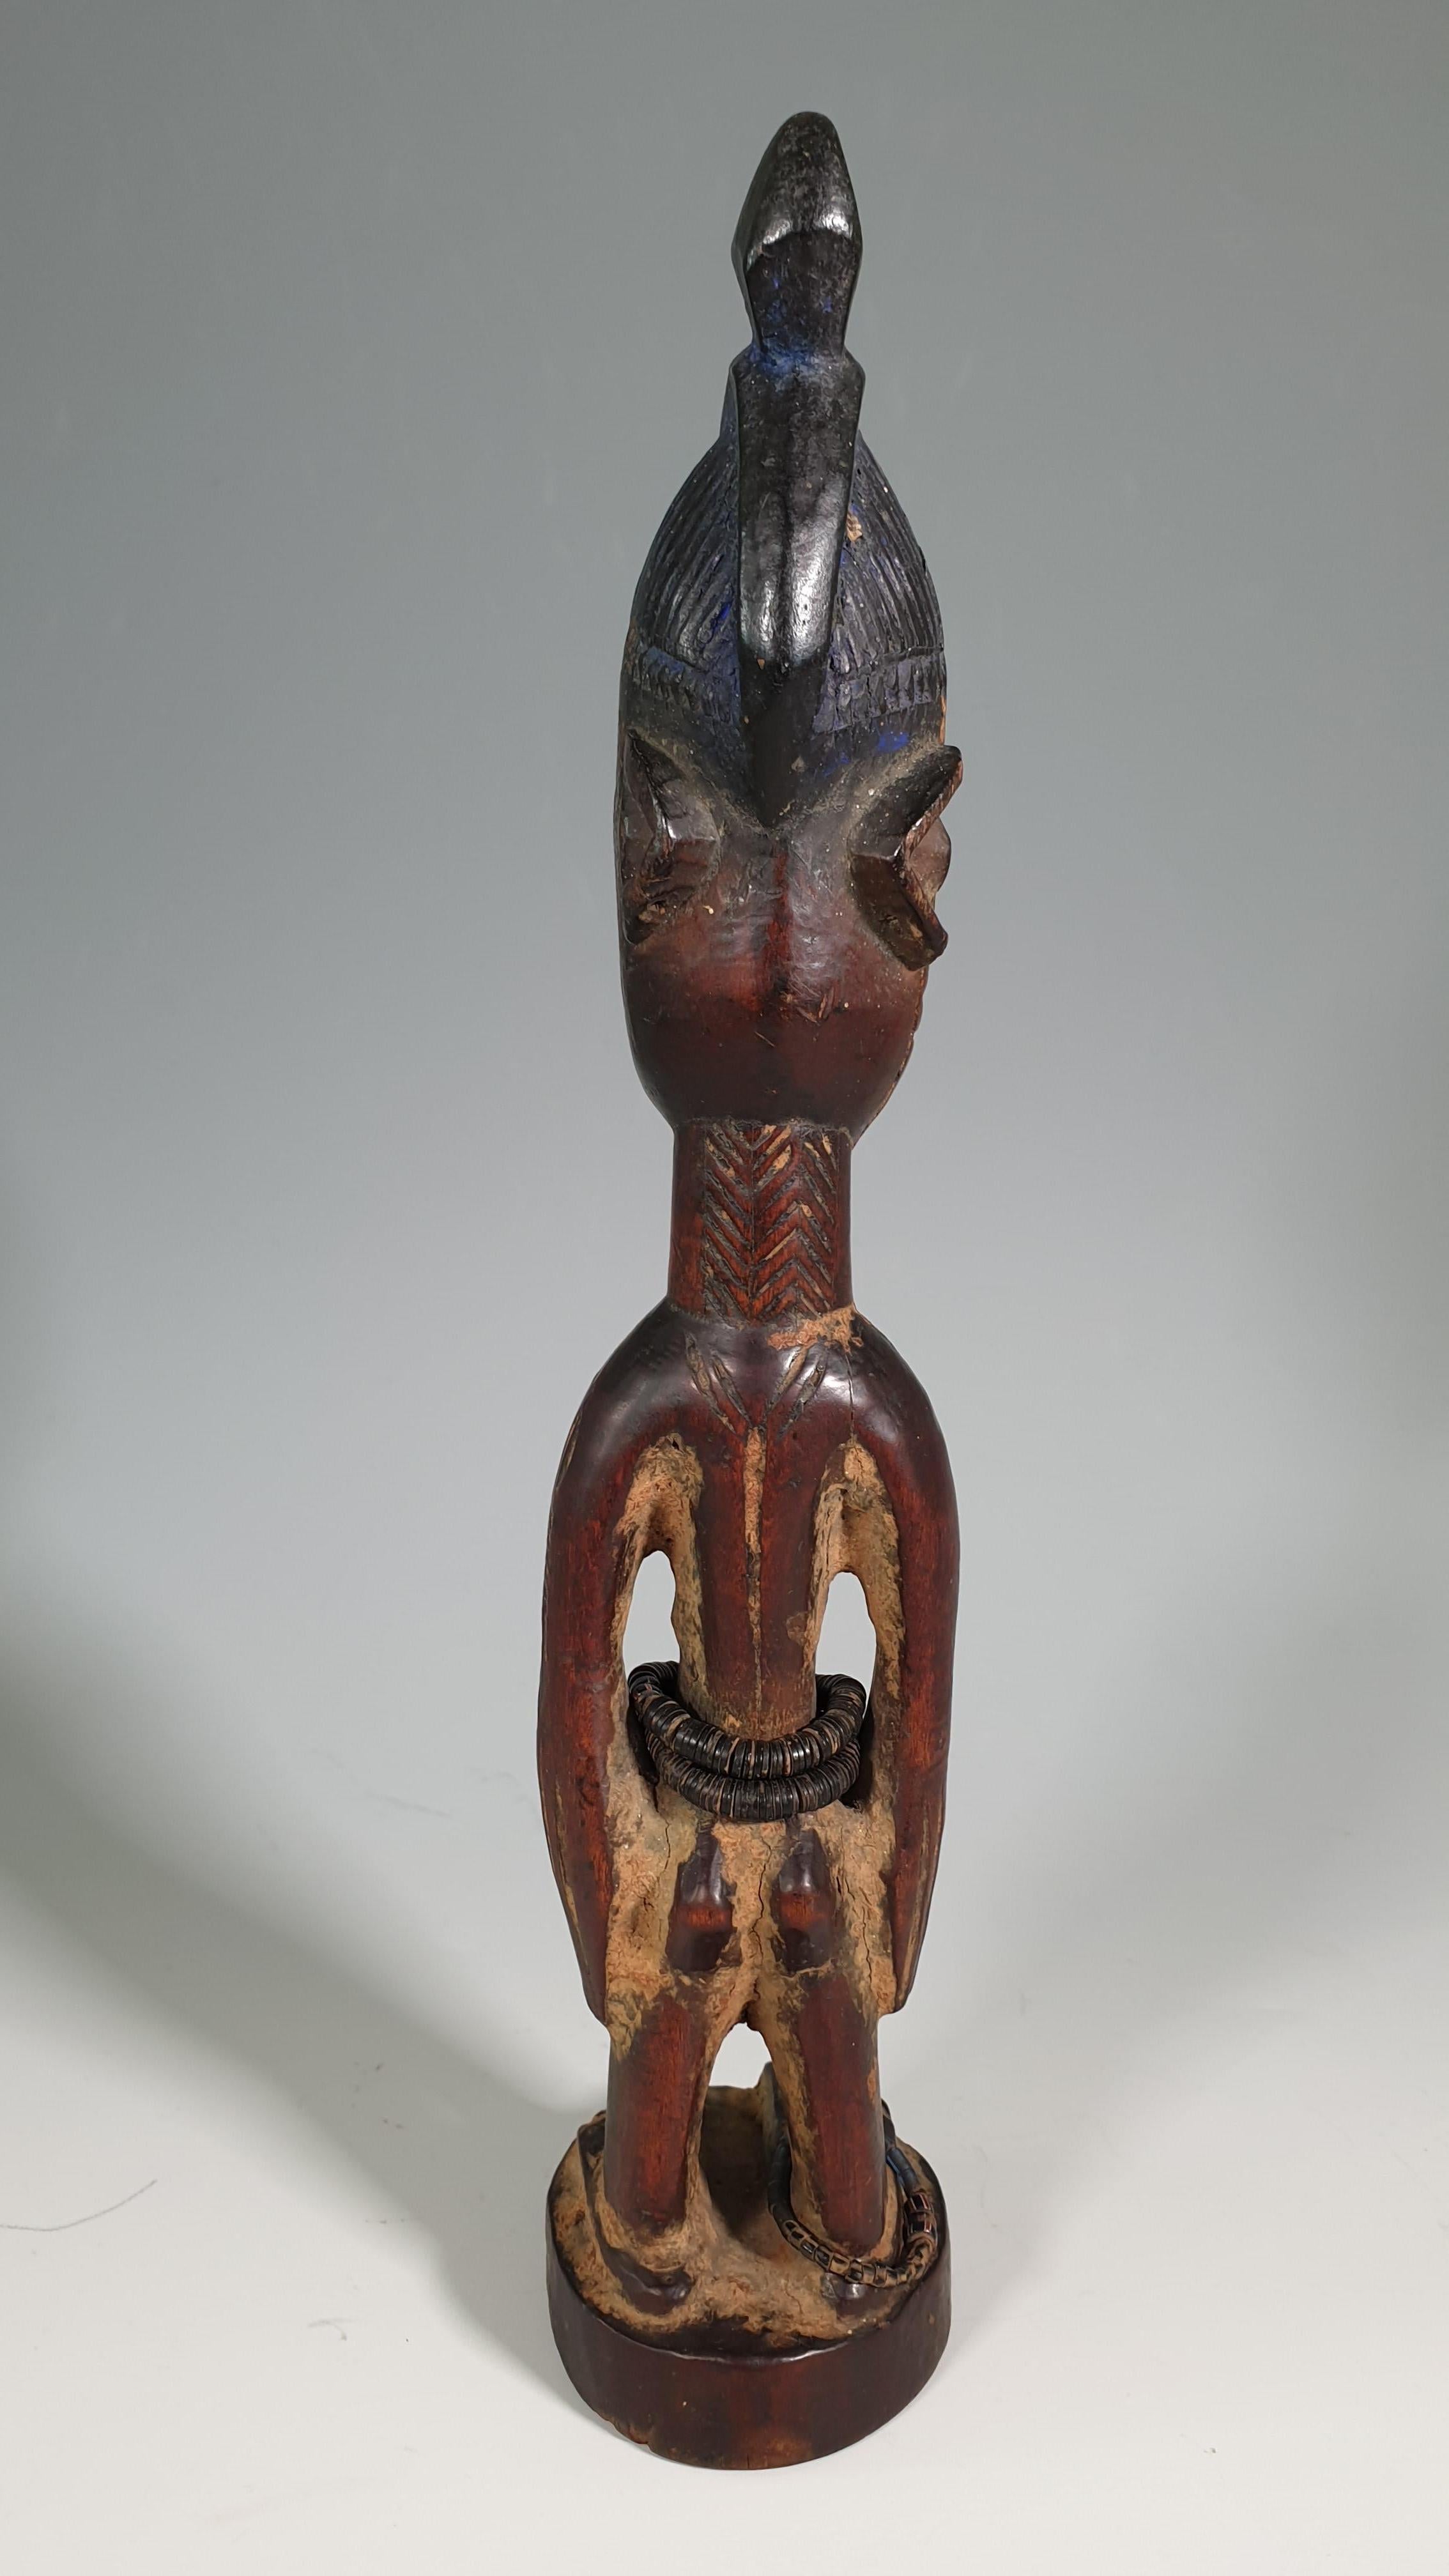 African tribal fine very rare Yoruba Ibeji figure Efon Alaye
A finely carved rare female Ibeji figure from the Efon Alaye region of Nigeria
Standing upright with arms at side with bulging eyes, dark brown patina, the chevron crown painted with